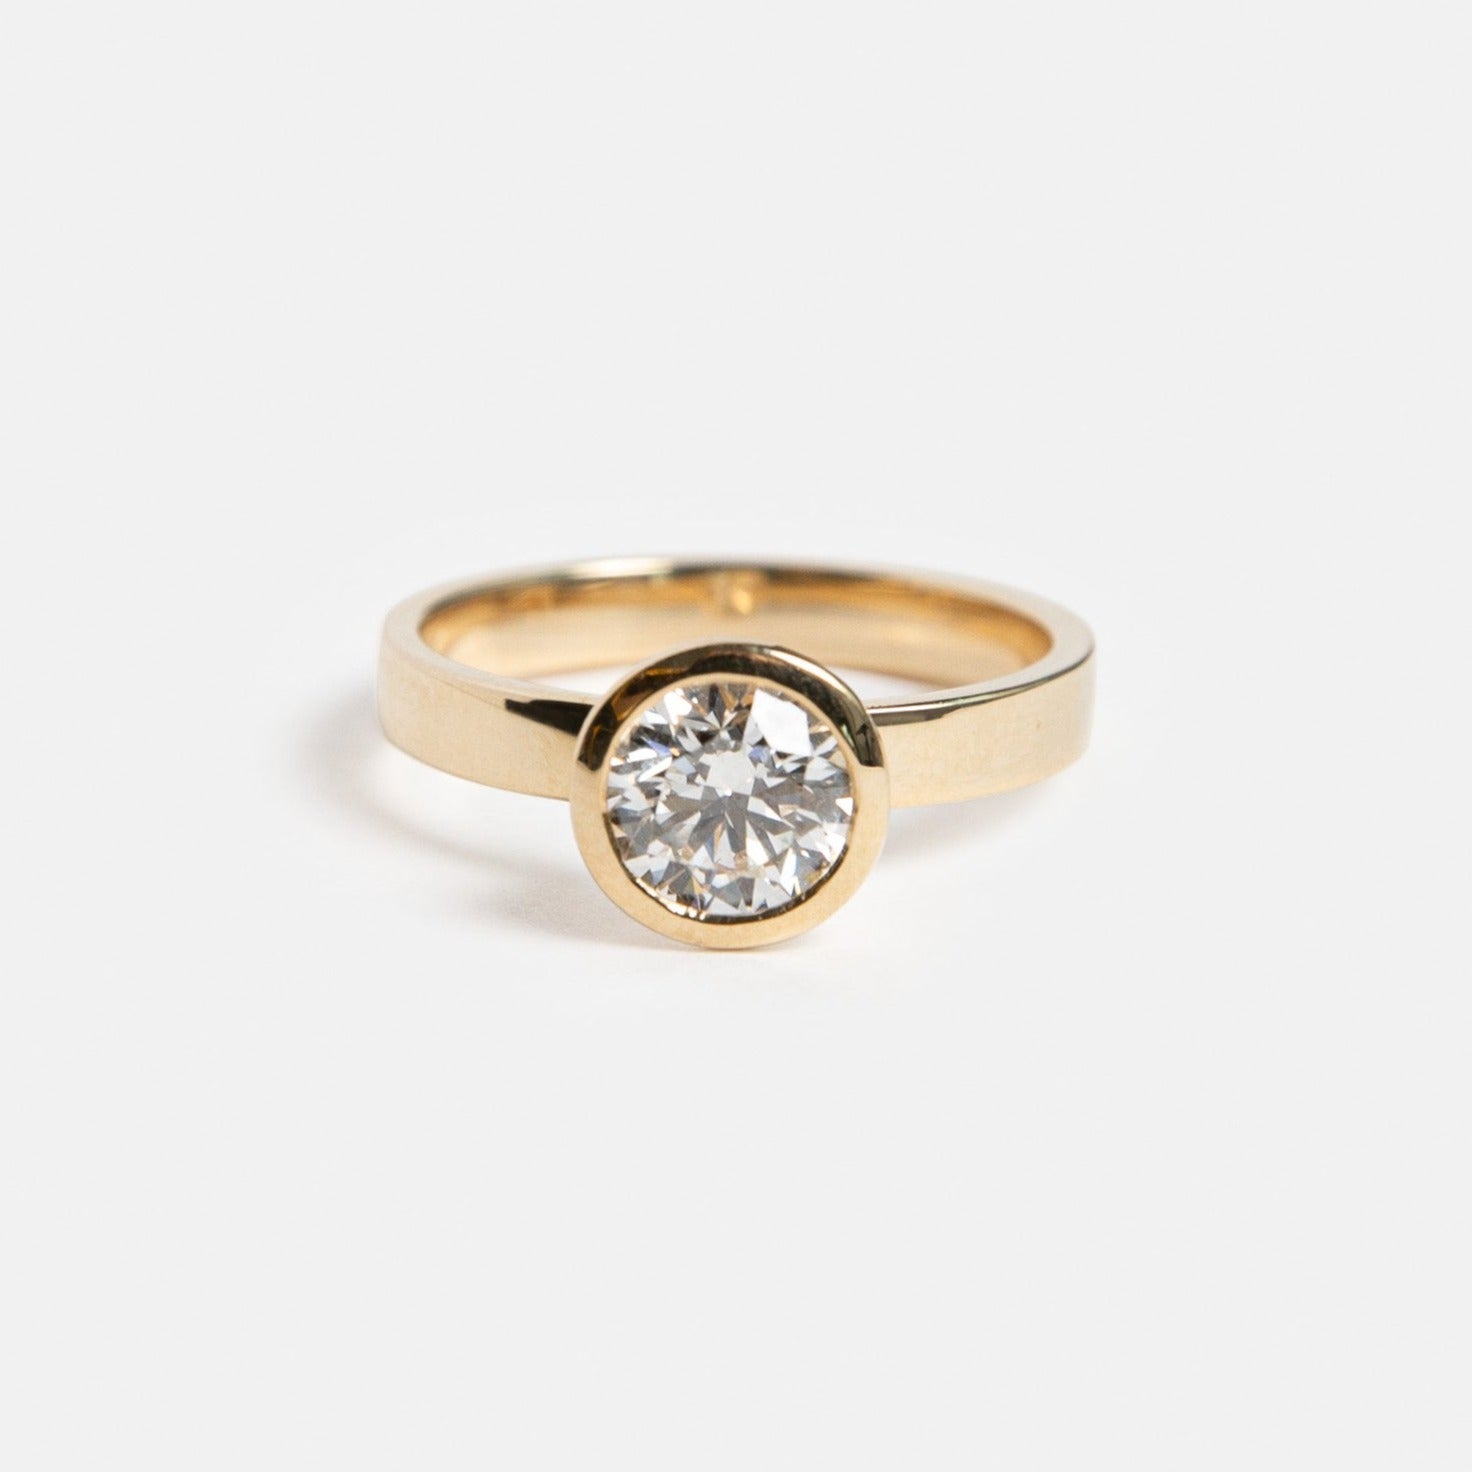 Agne Designer Ring in 14k Gold set with round cut lab-grown diamond By SHW Fine Jewelry NYC